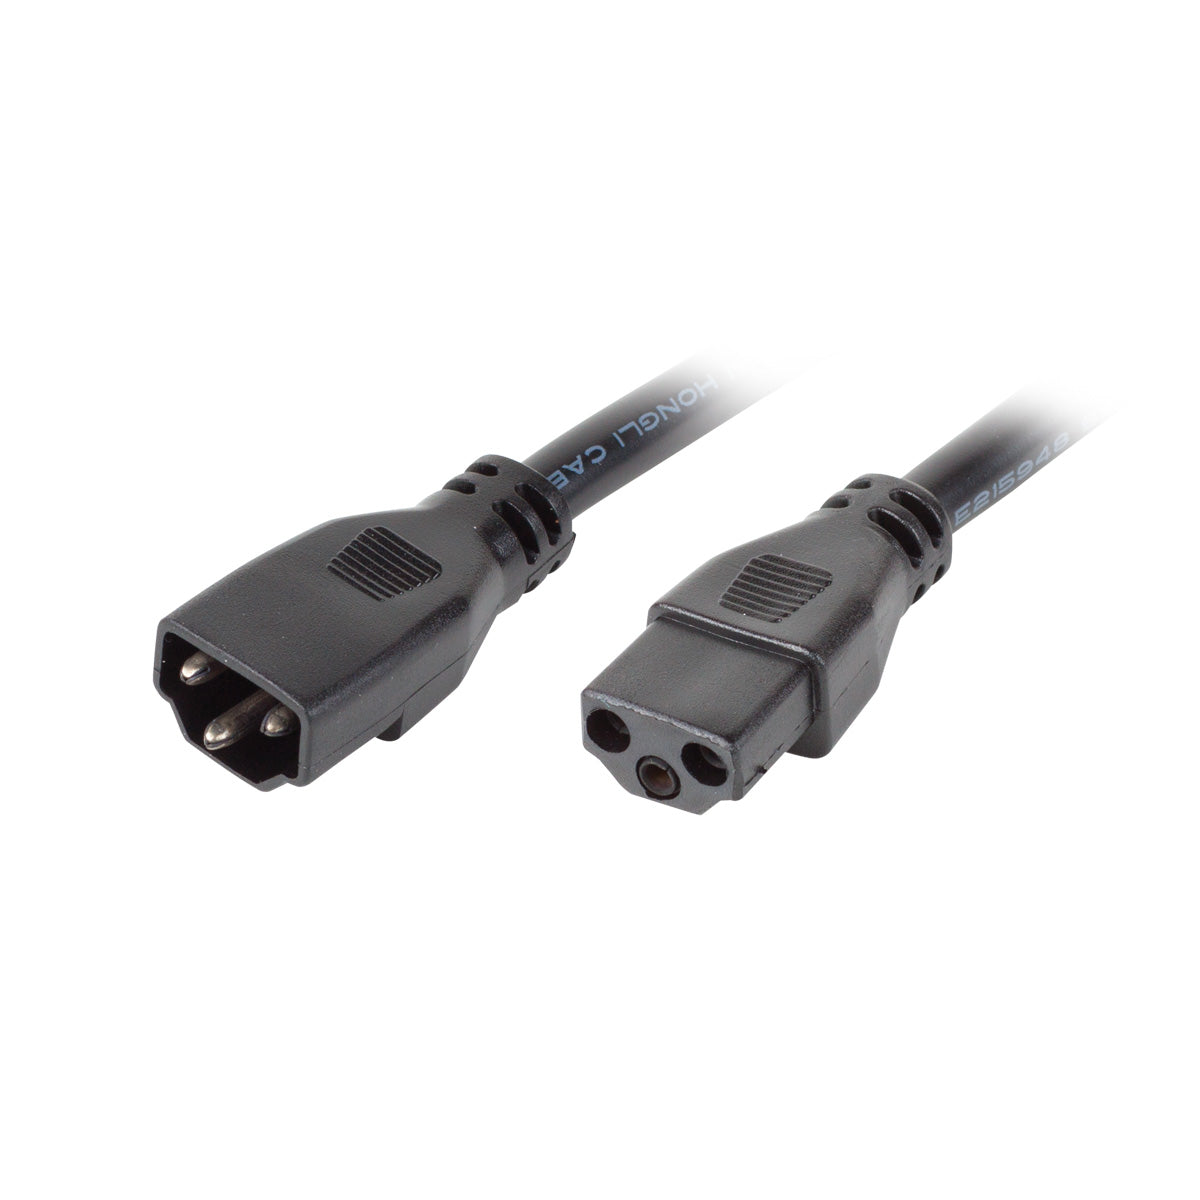 Antares Link Cord